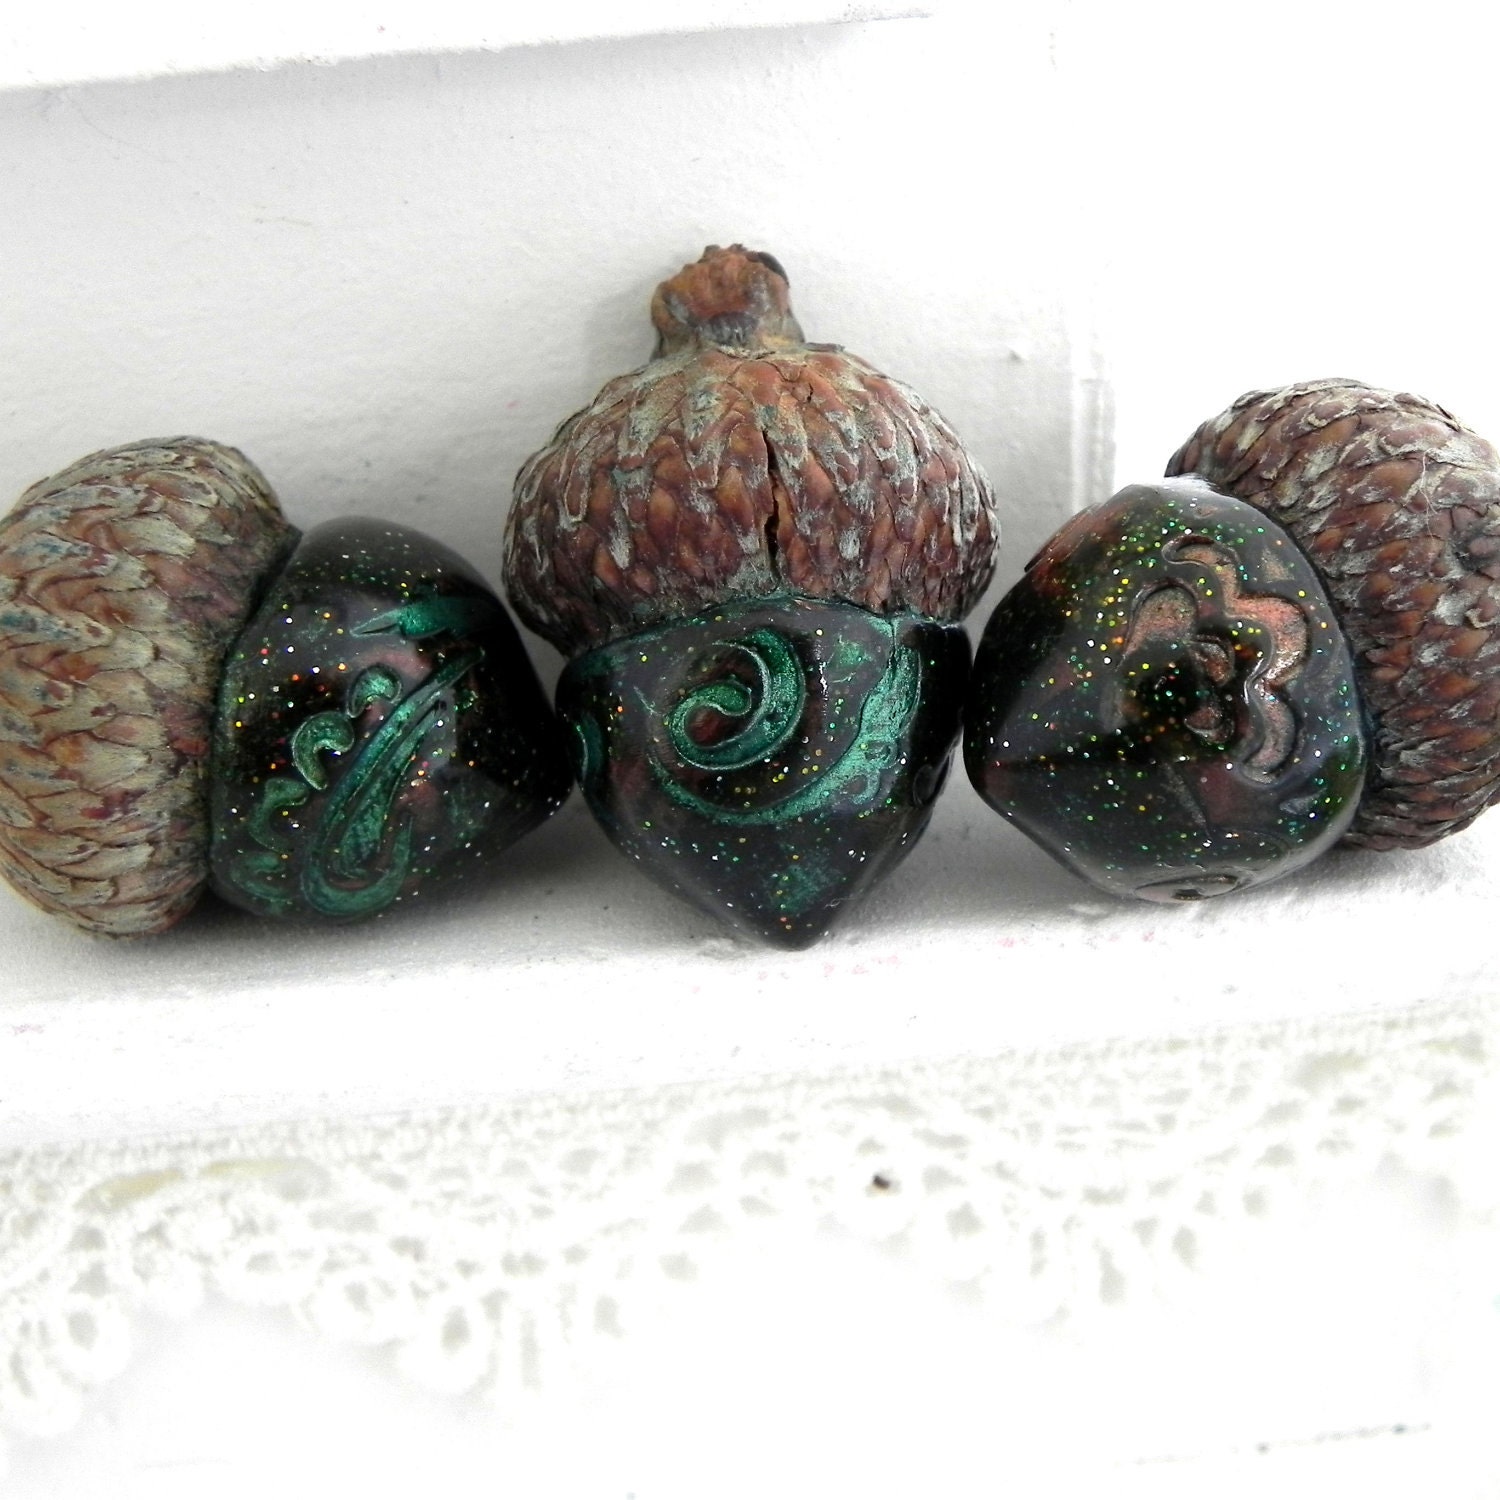 Teal and Copper Acorns Rustic Wedding Table Decorations Favors Handmade 